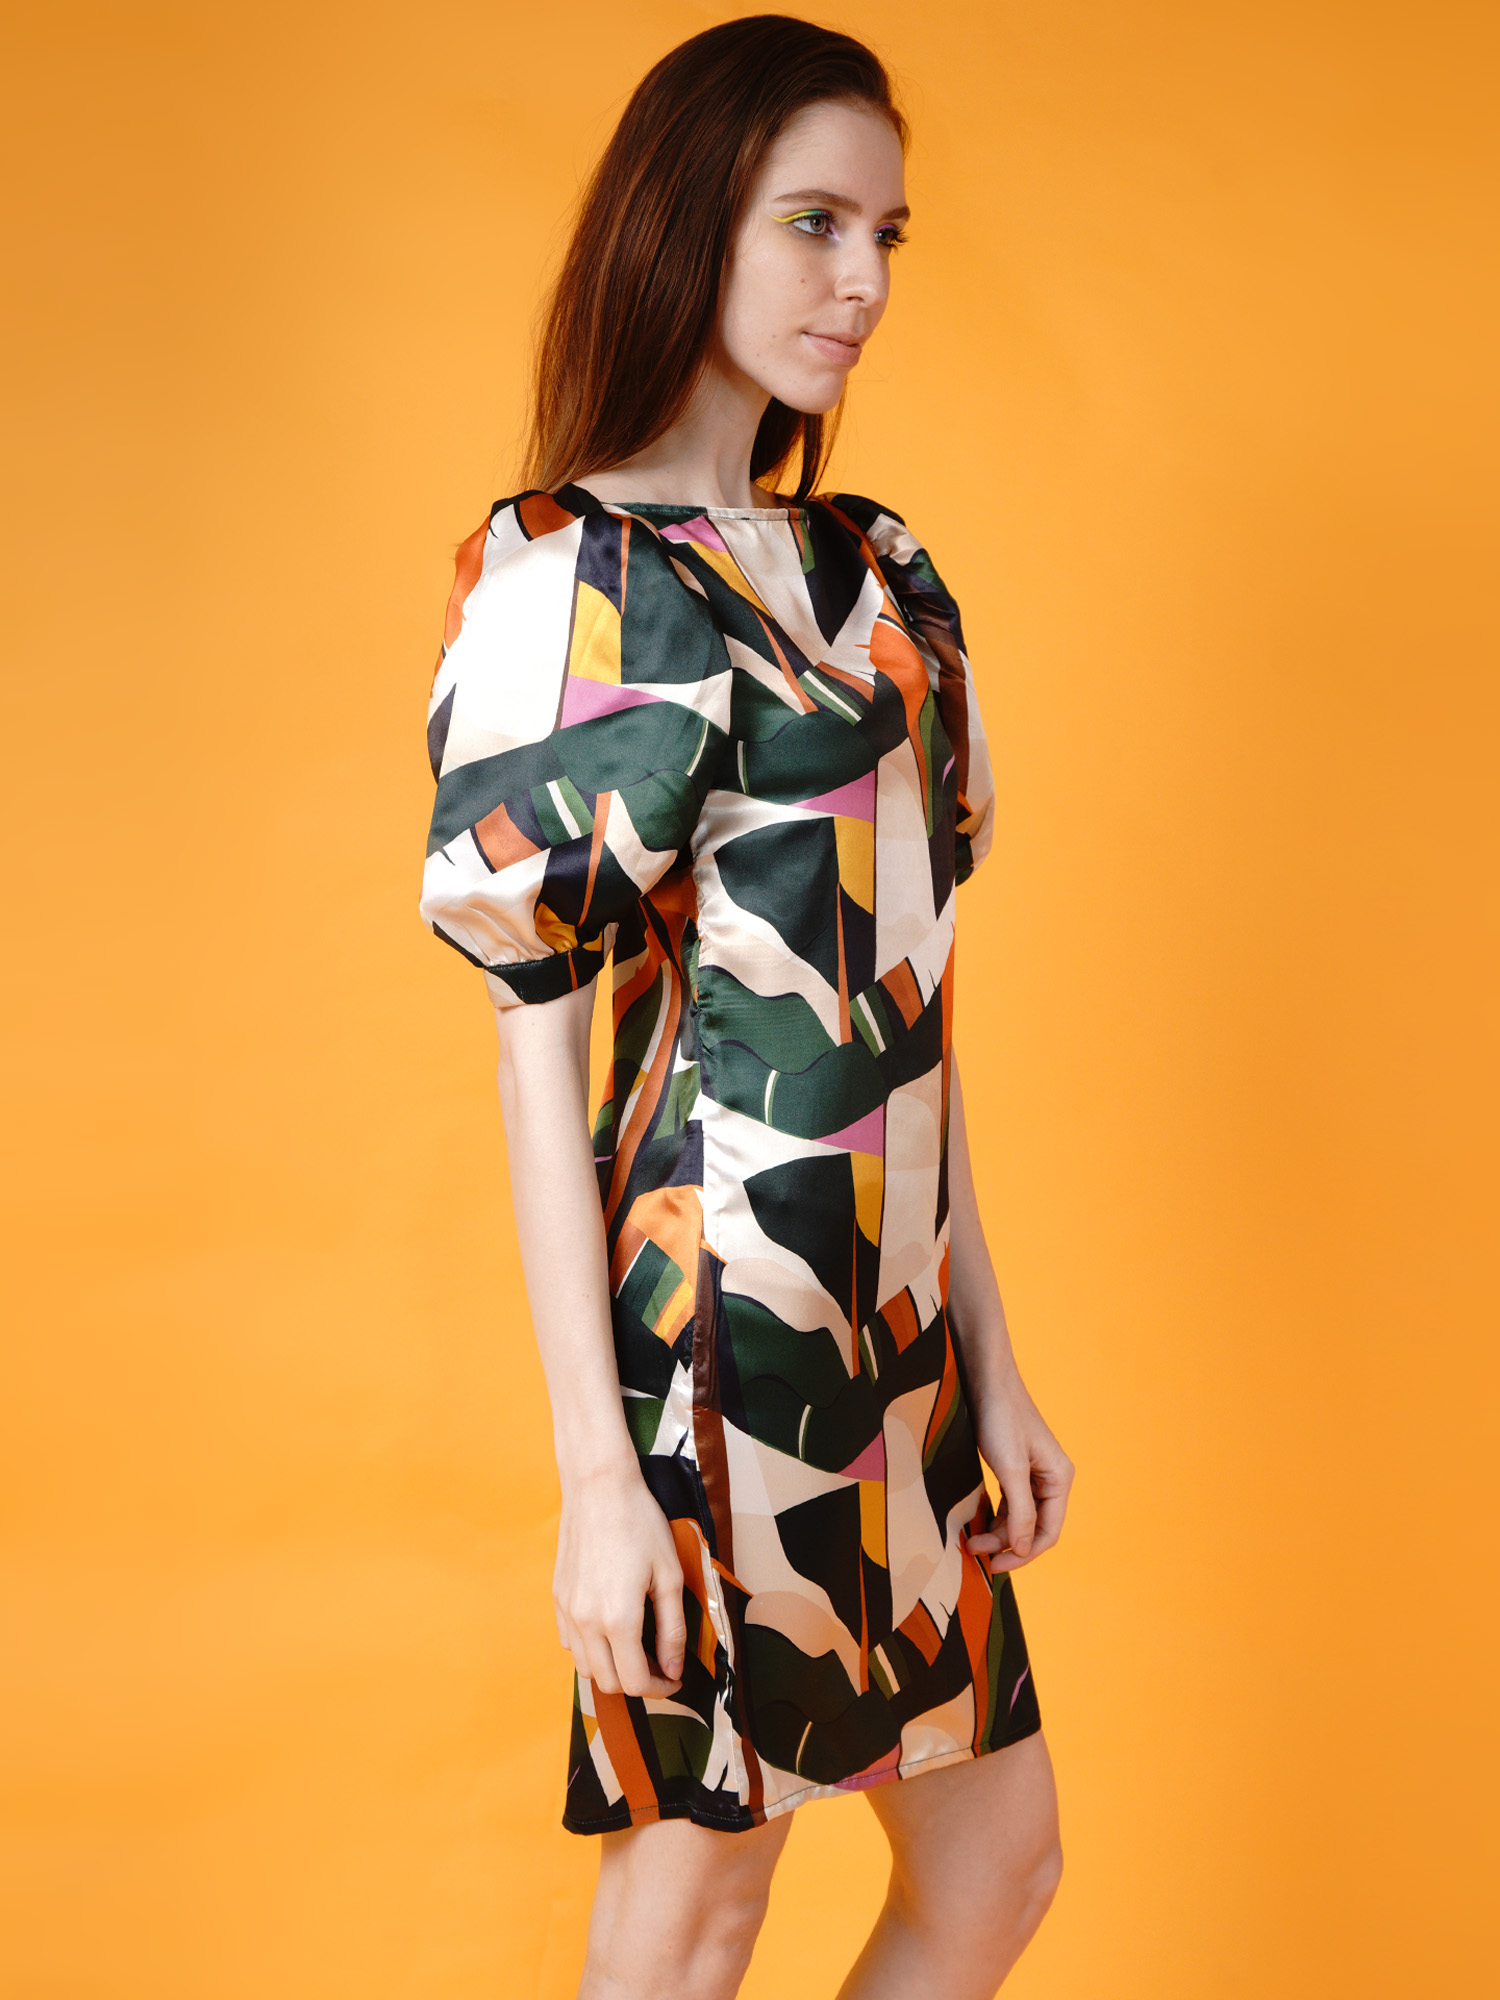 Colorful abstract dress - Front